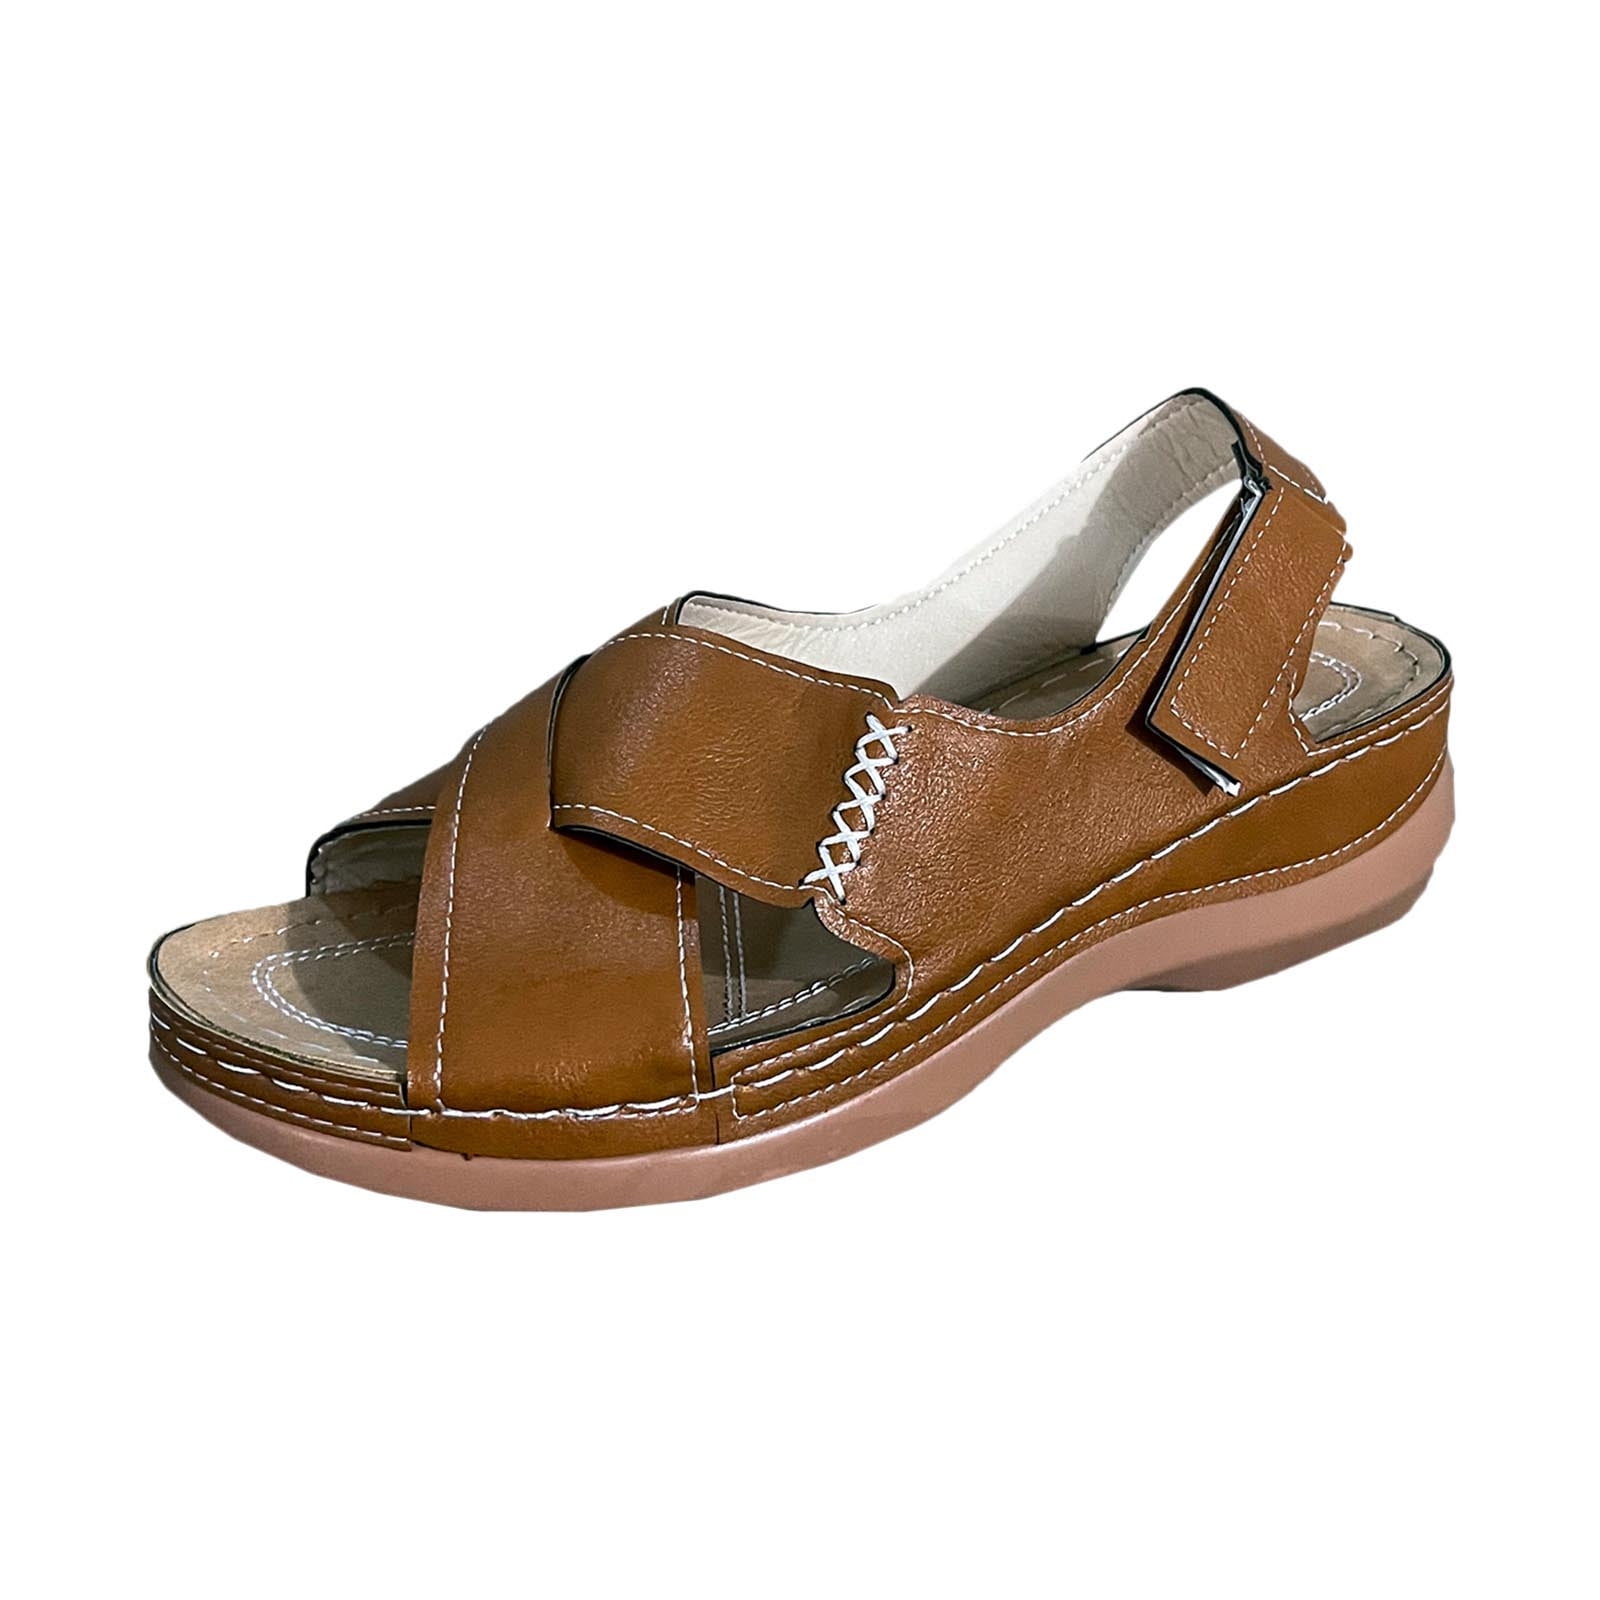 The Most Stylish Men's Leather Sandals For Summer 2023